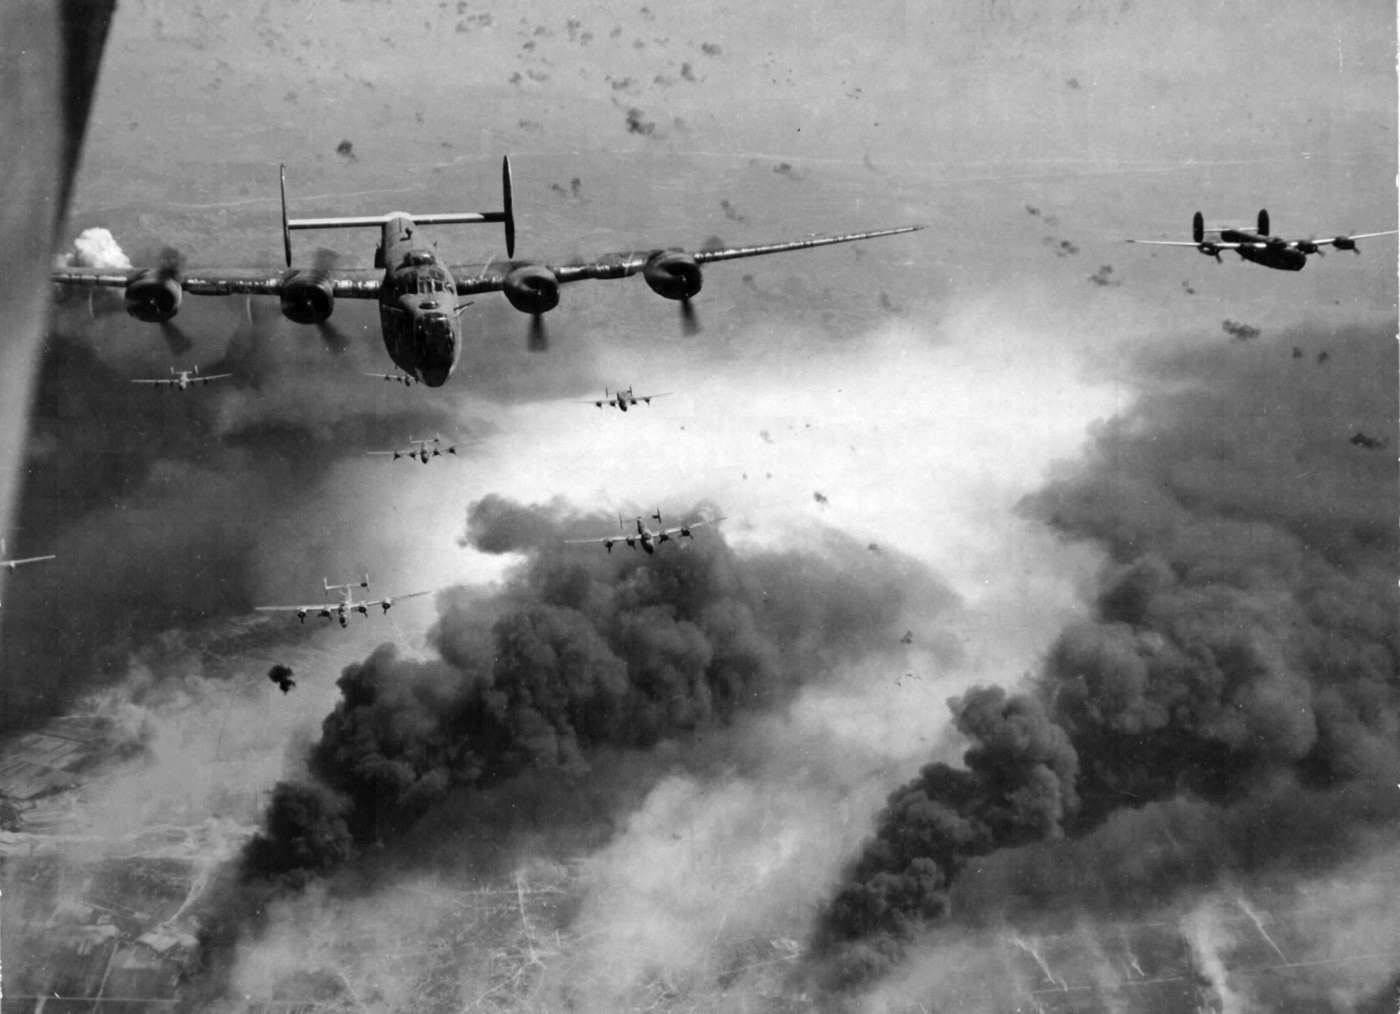 Shown in this photo are US Army Air Force strategic bombers attacking Ploesti, Romania. This was the beginning of what we now know as Operation Gunn. One of the bombers was piloted by Lt. Col. Gunn. It was shot down and he survived. Gunn was housed with allied prisoners of war held by Romania. Fortunately, Gunn was able to hitch a ride with Romanian Captain Constantin Cantacuzino who was able to transport him to the Fifteenth Air Force headquarters base at San Giovanni airfield. 